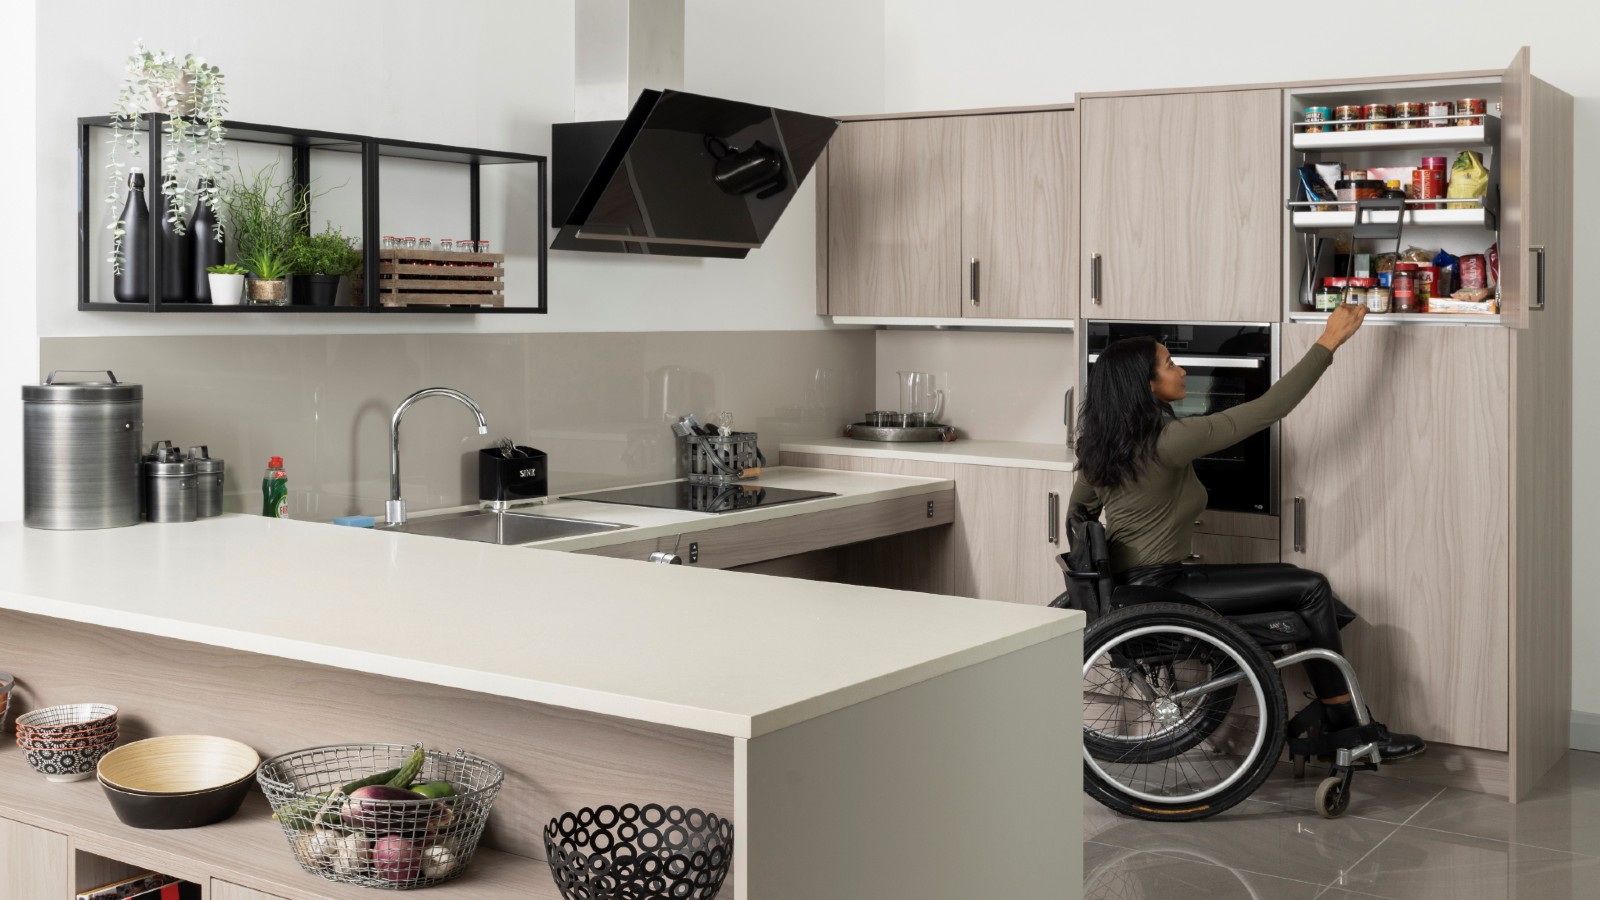 Design Considerations For Accessible Kitchens 